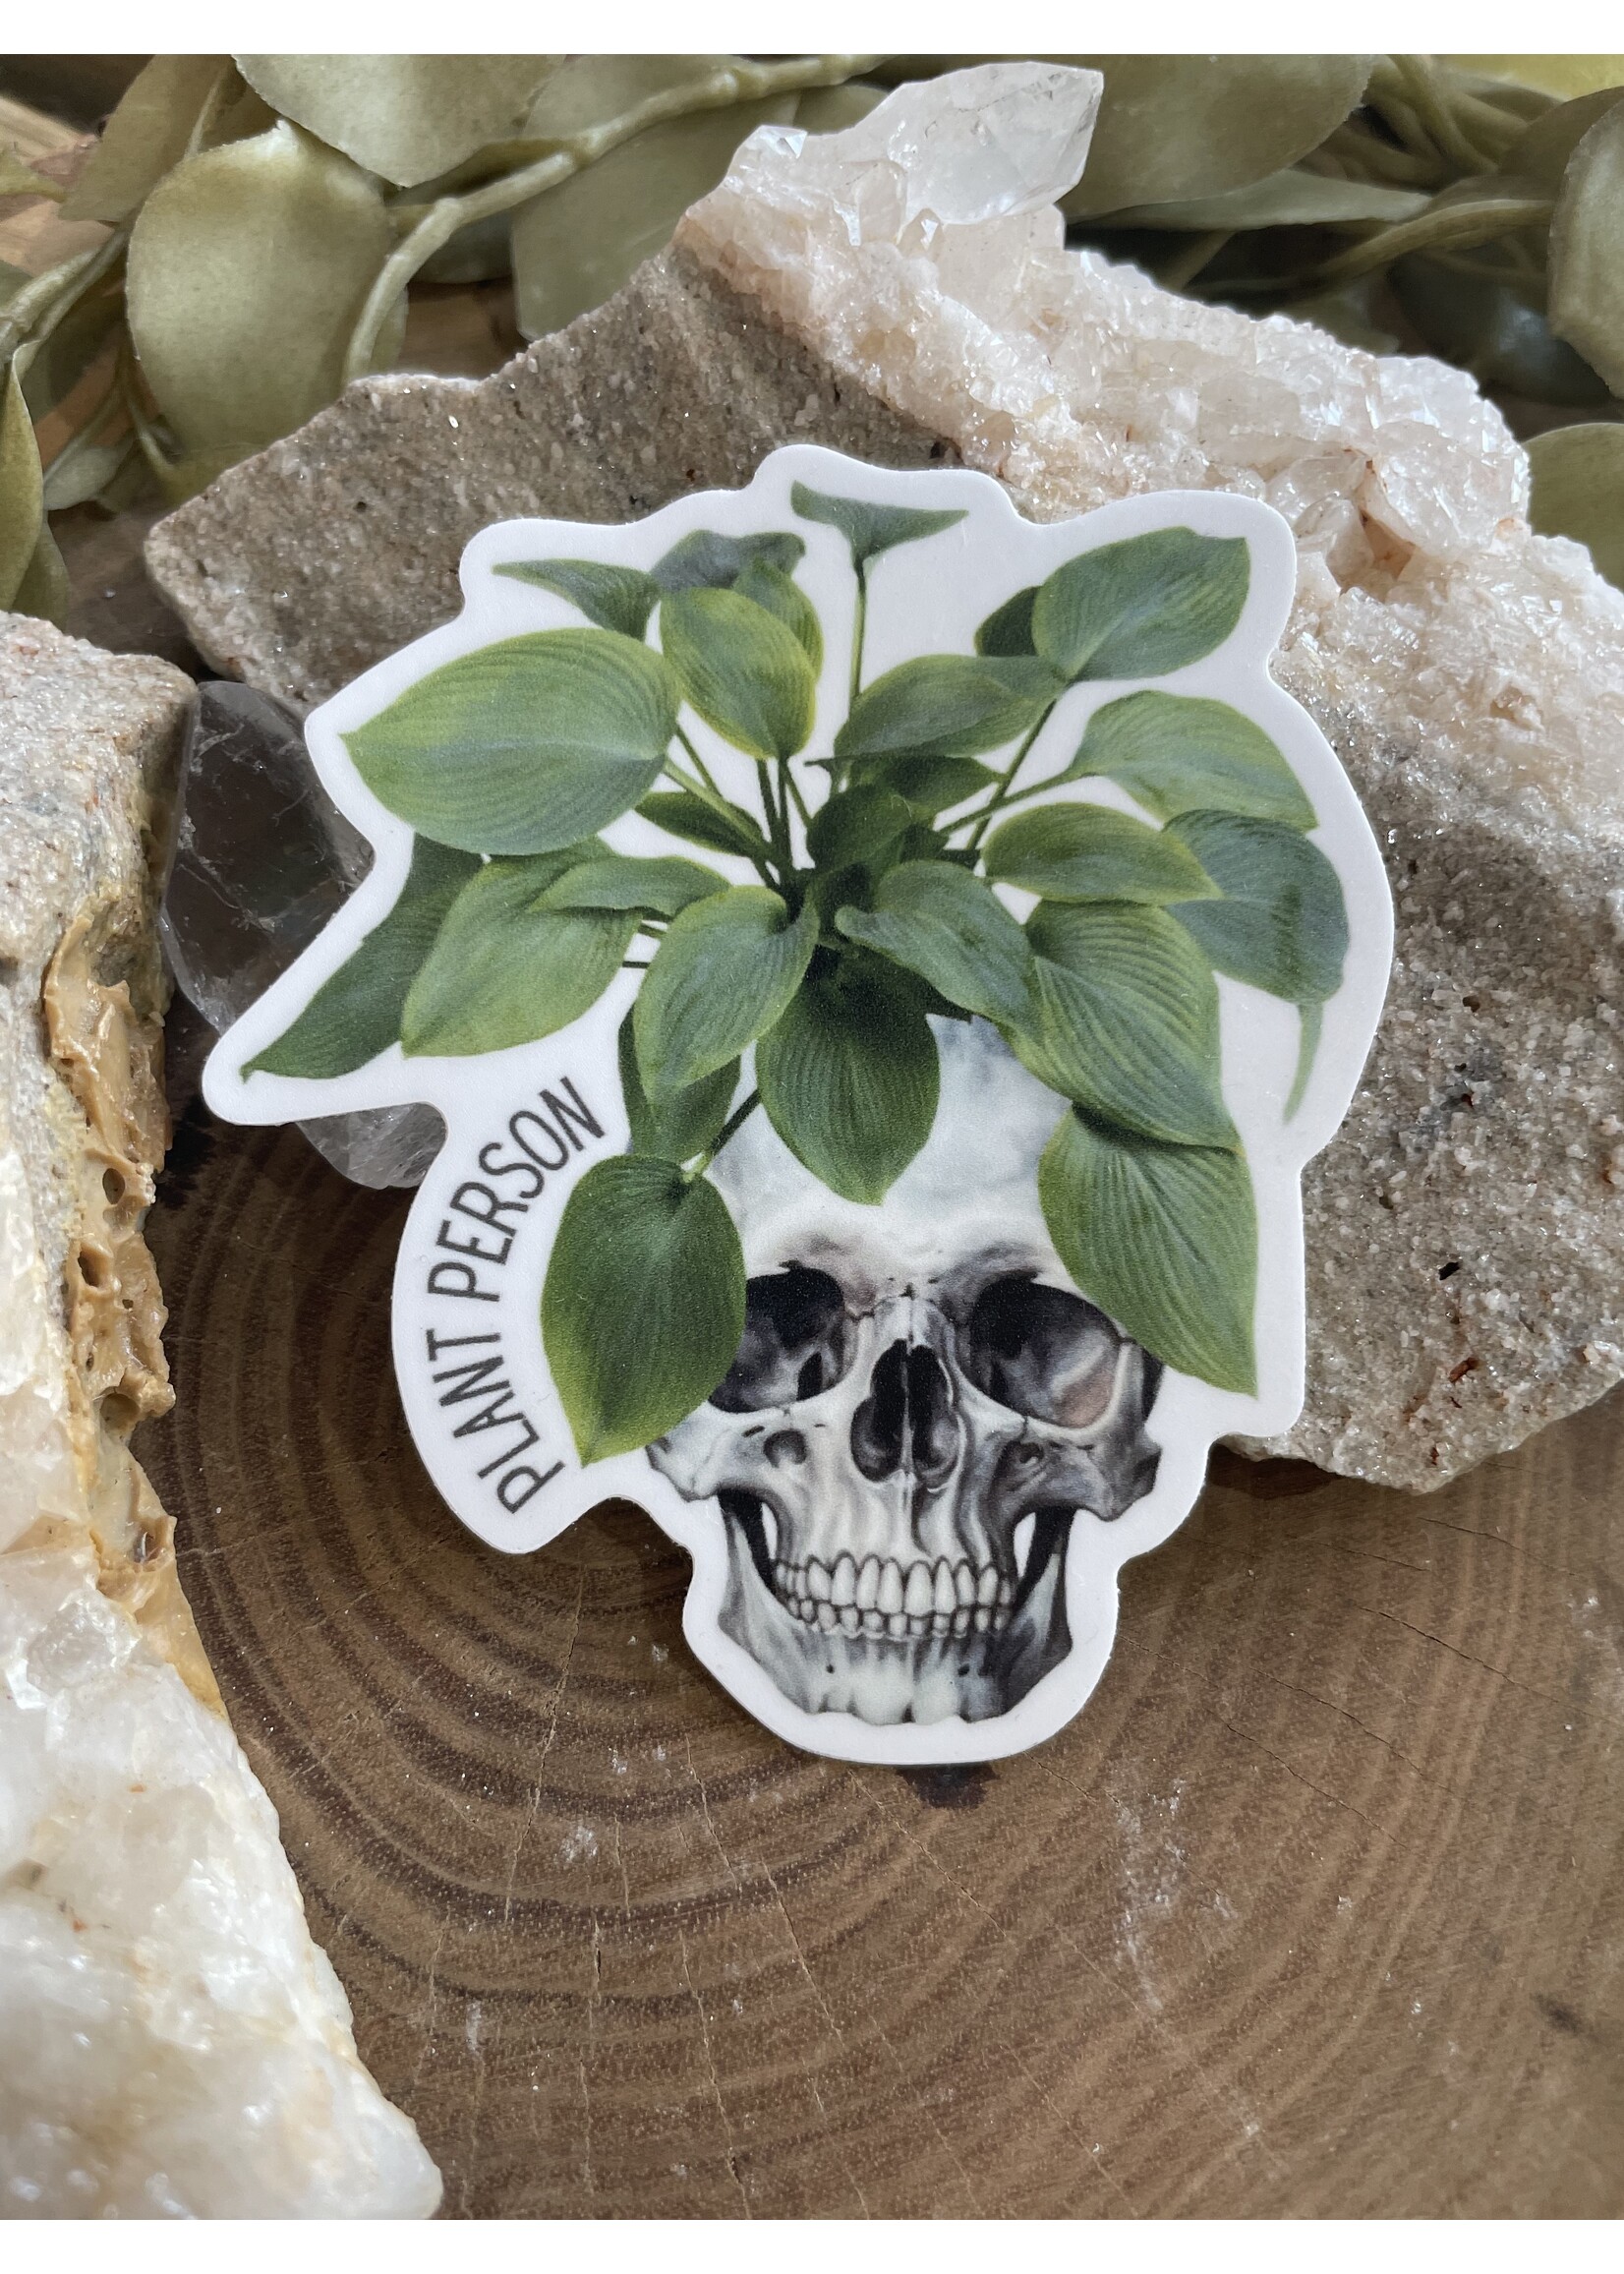 Tangled Up In Hue Sticker - PLANT PERSON